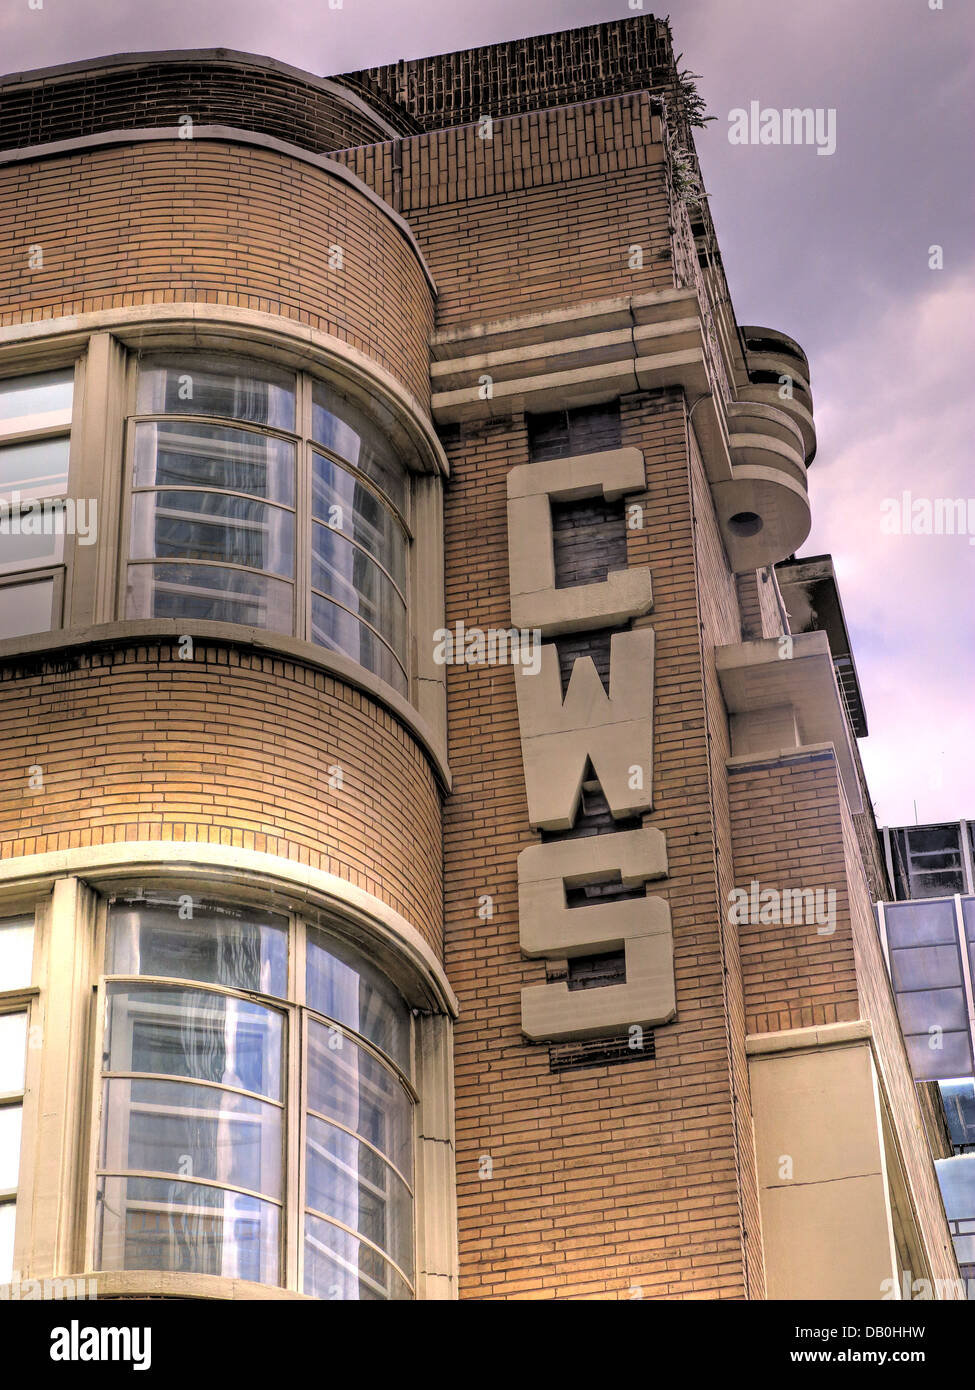 The CWS Building Balloon St Manchester England, UK Stock Photo